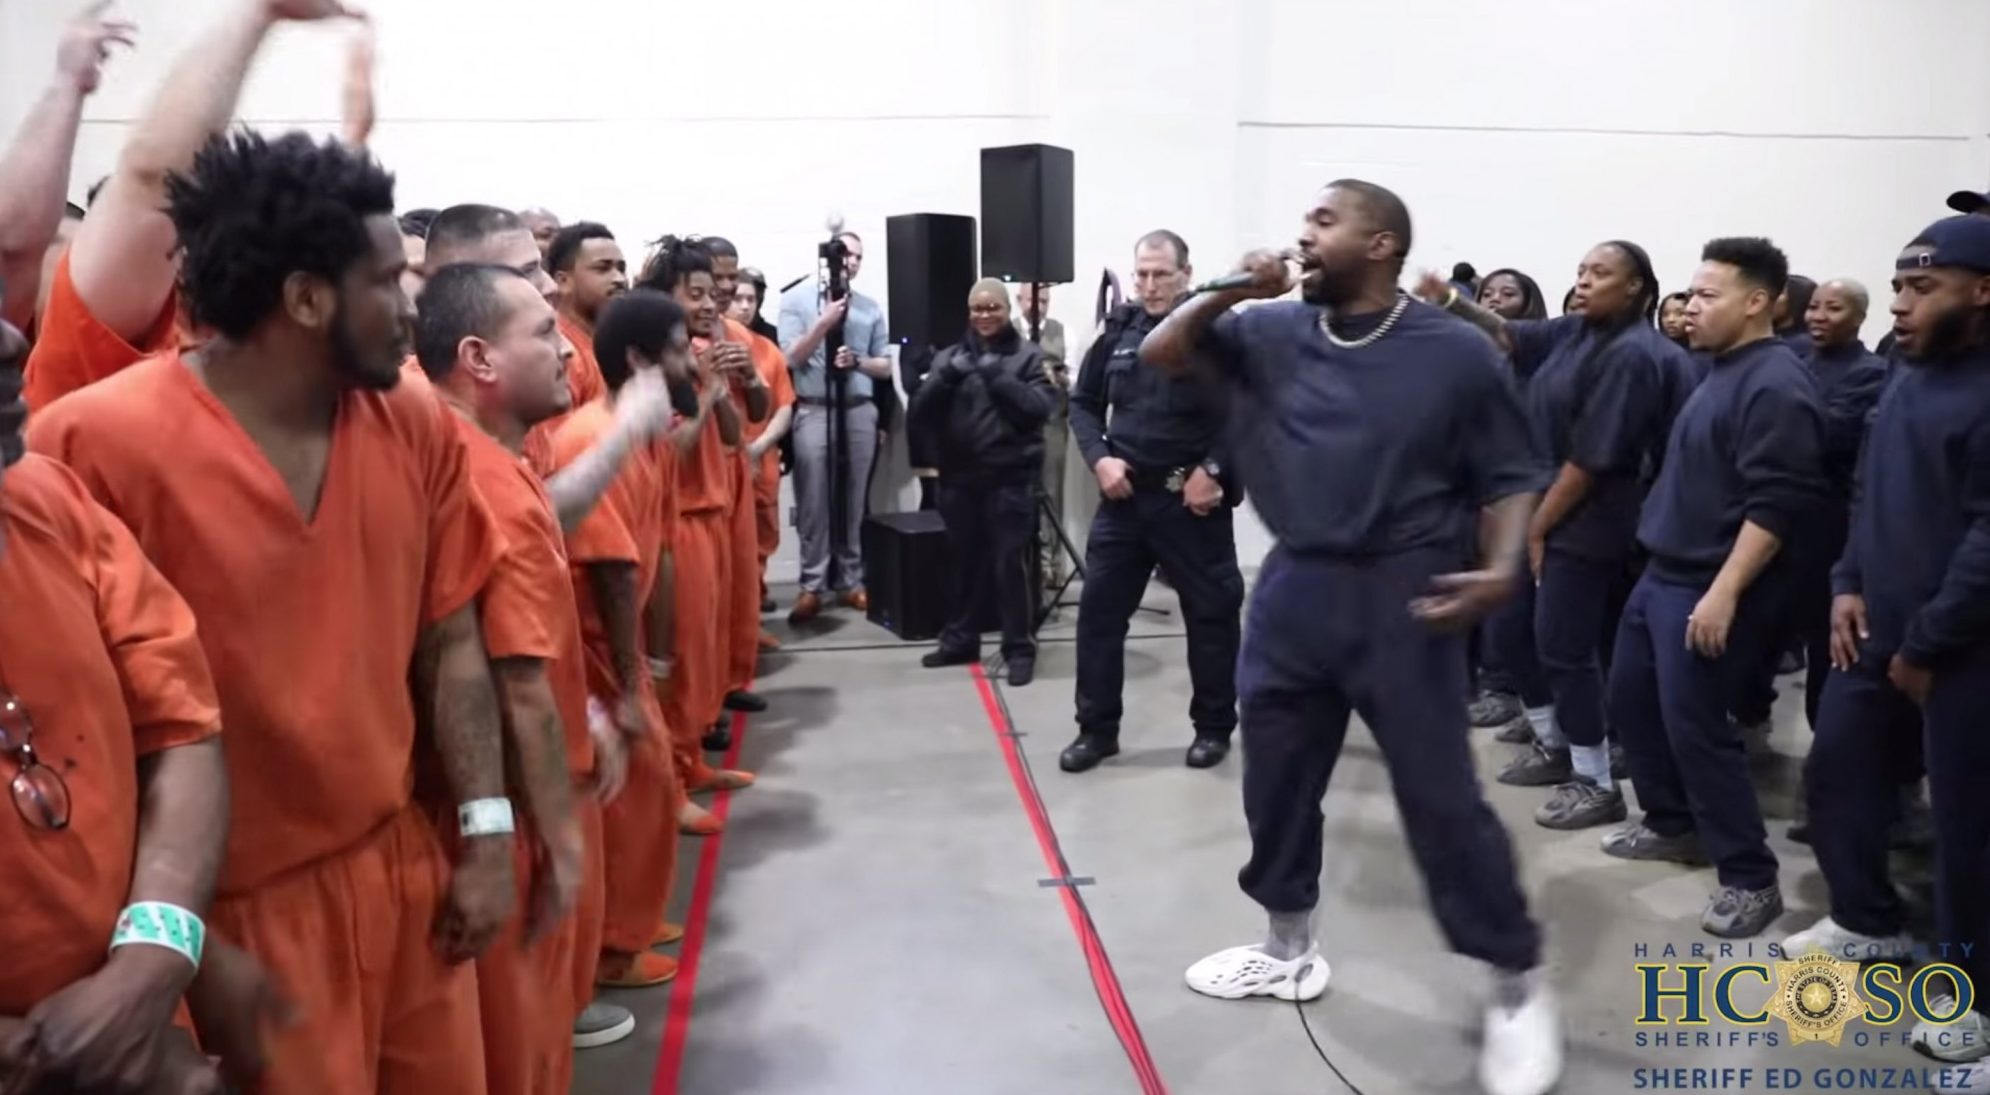 Kanye West performs at a surprise concert for inmates in the Harris County Jail in Houston, Texas, on Nov. 15, 2019. (Harris County Sheriff's Office)